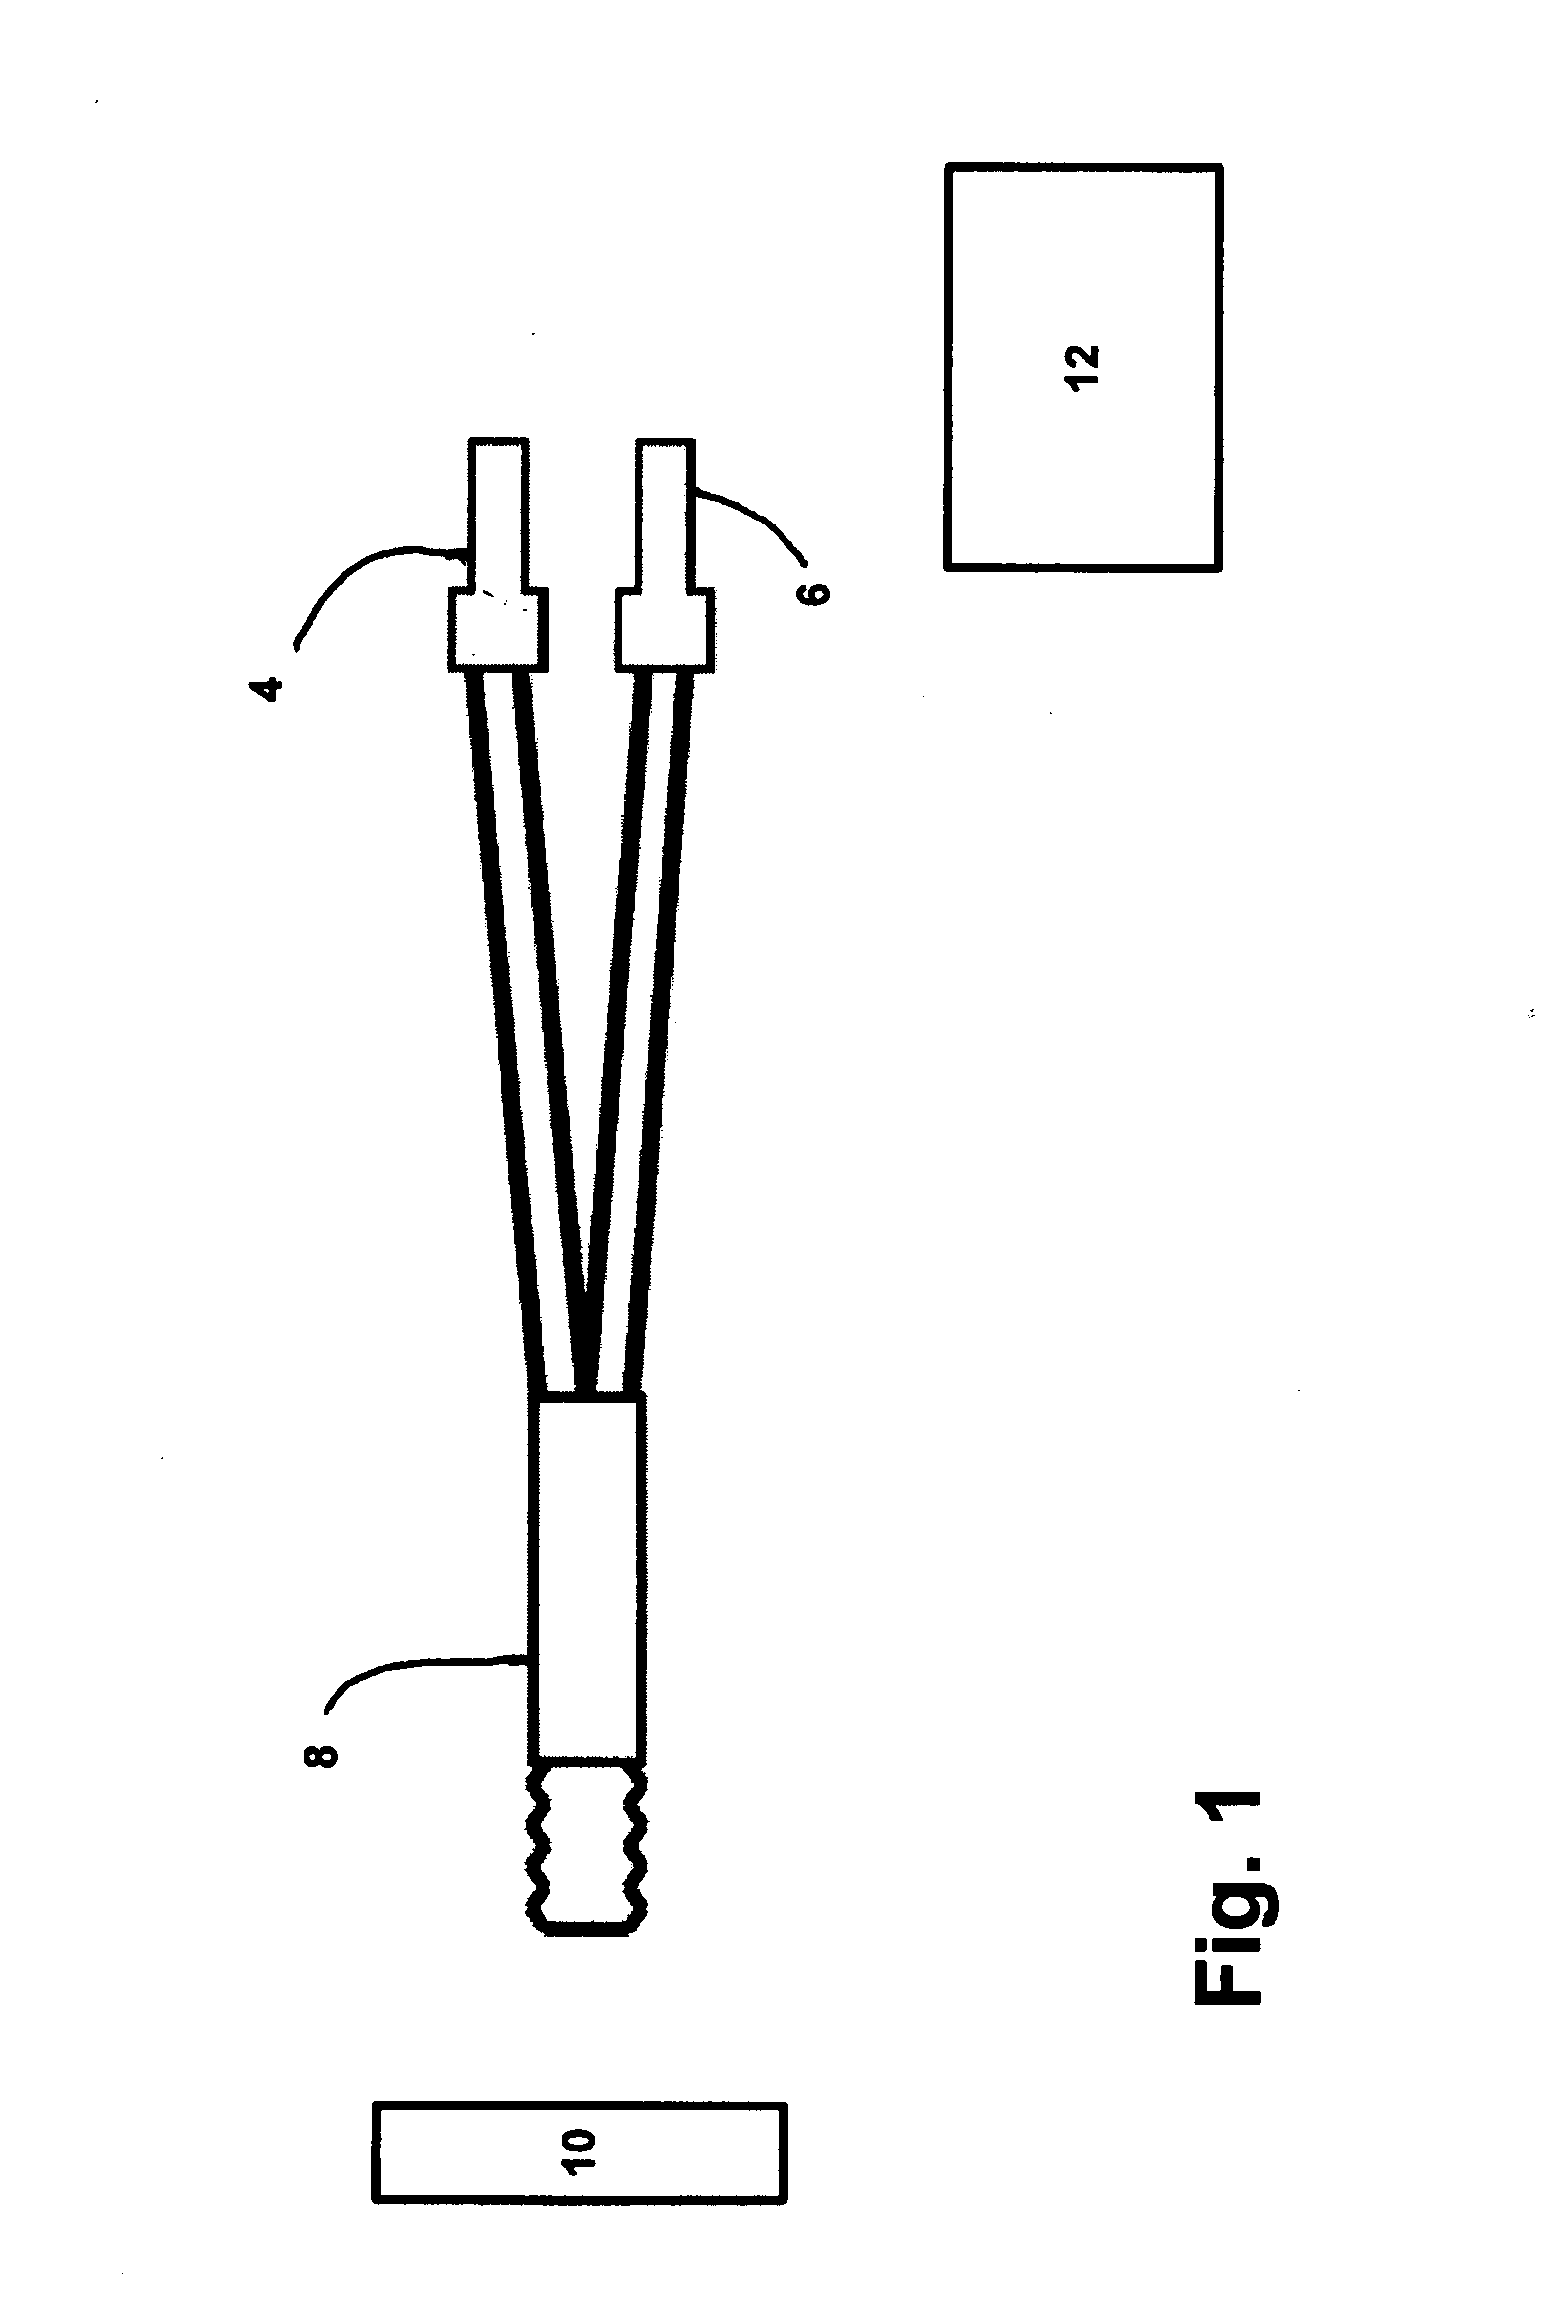 Method of measuring the concentration of hydrogen peroxide, peroxyacetic acid, chlorinated compounds and other aqueous oxidizer compounds